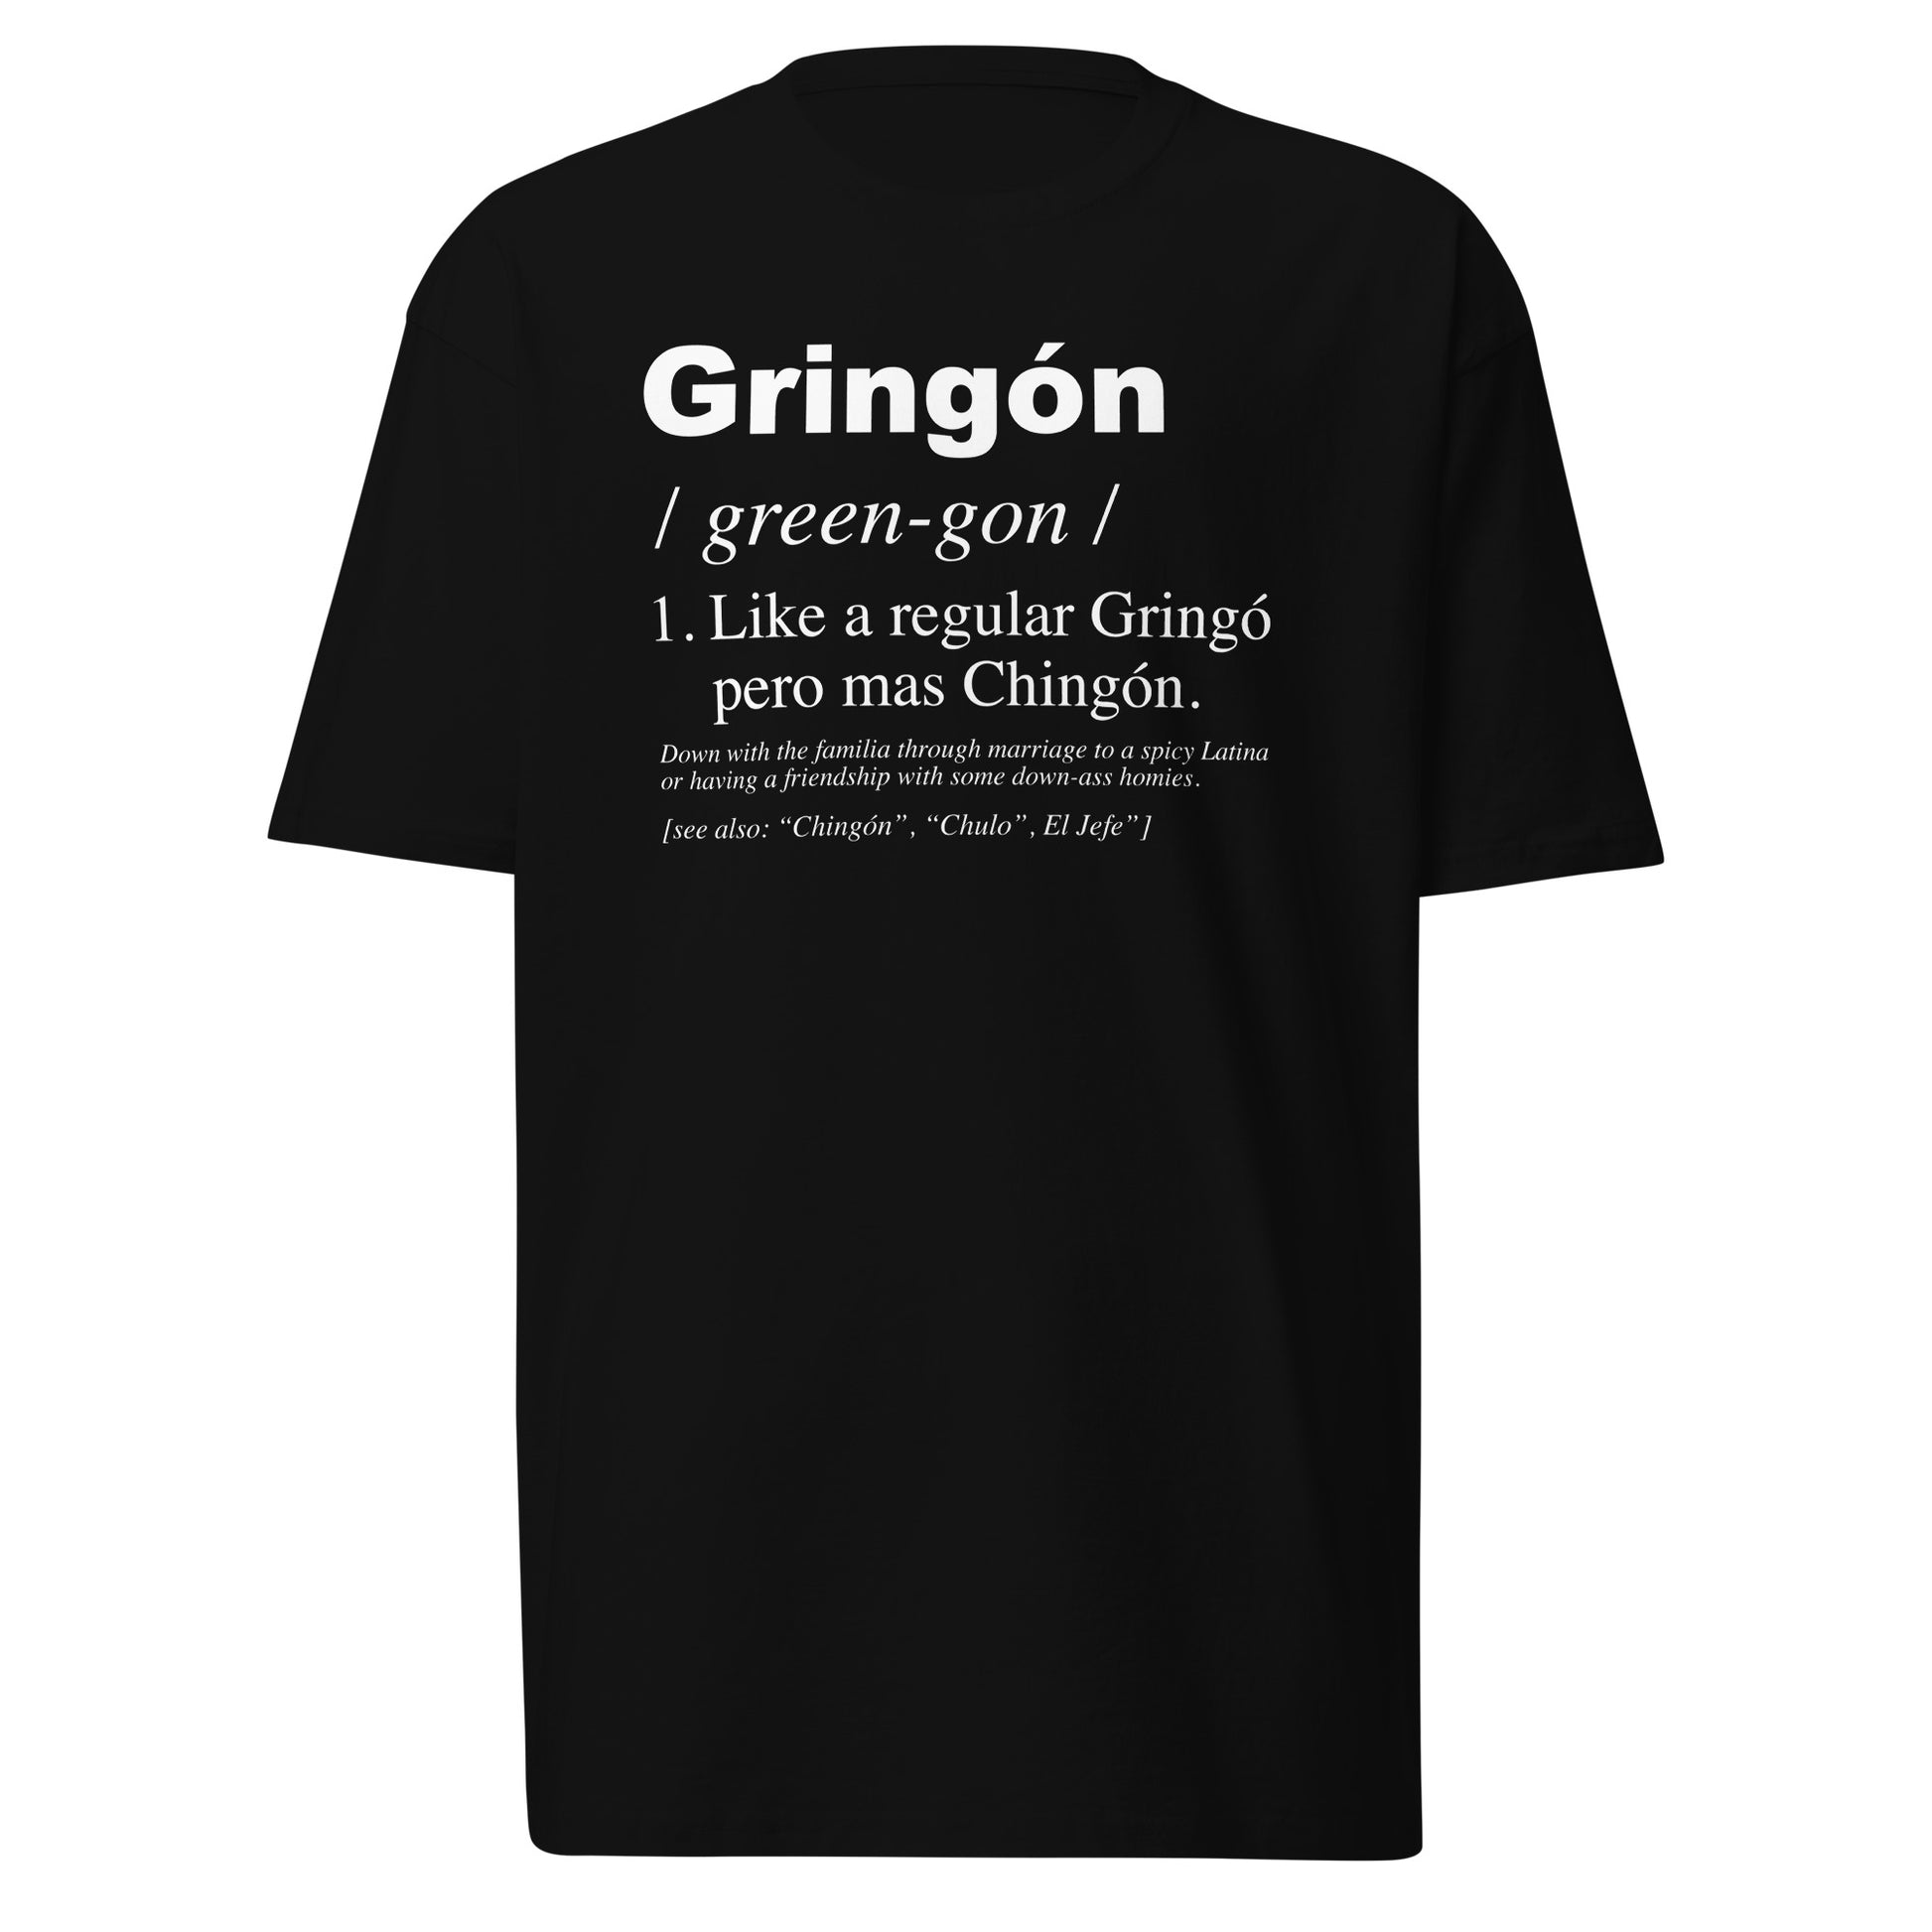 Gringón" T-shirt with funny definition graphic on black background.